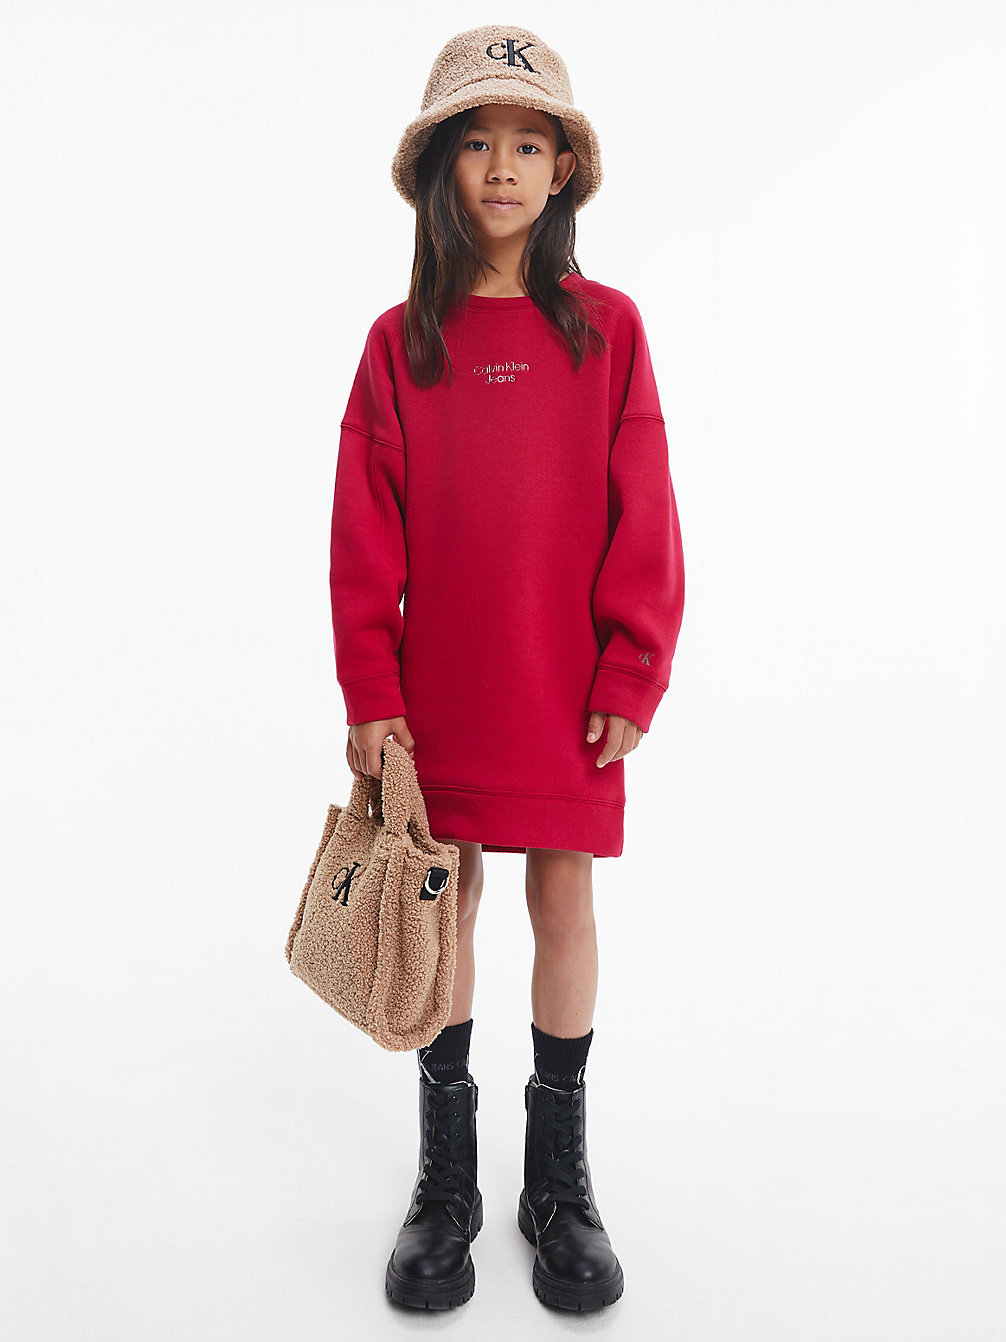 ROYAL BERRY Recycled Polyester Sweatshirt Dress undefined girls Calvin Klein